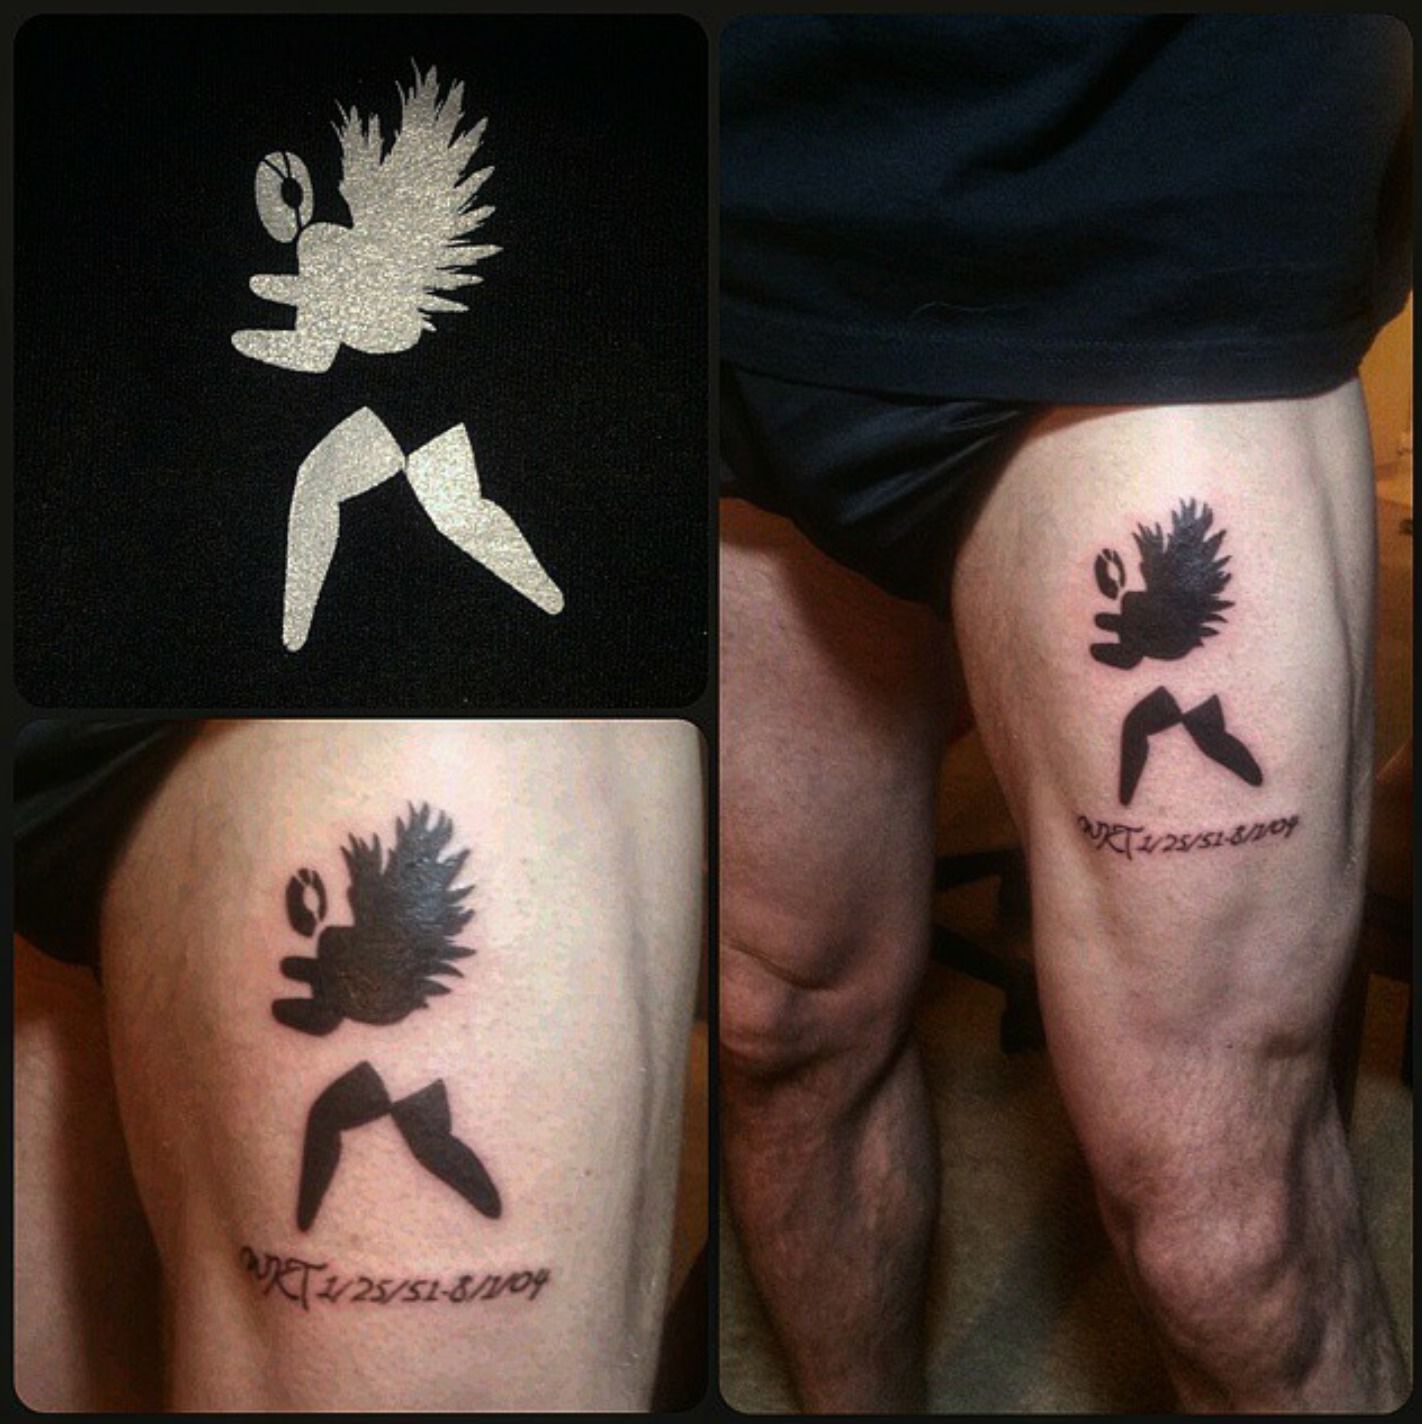 Wrestling over a tattoo - Chiever